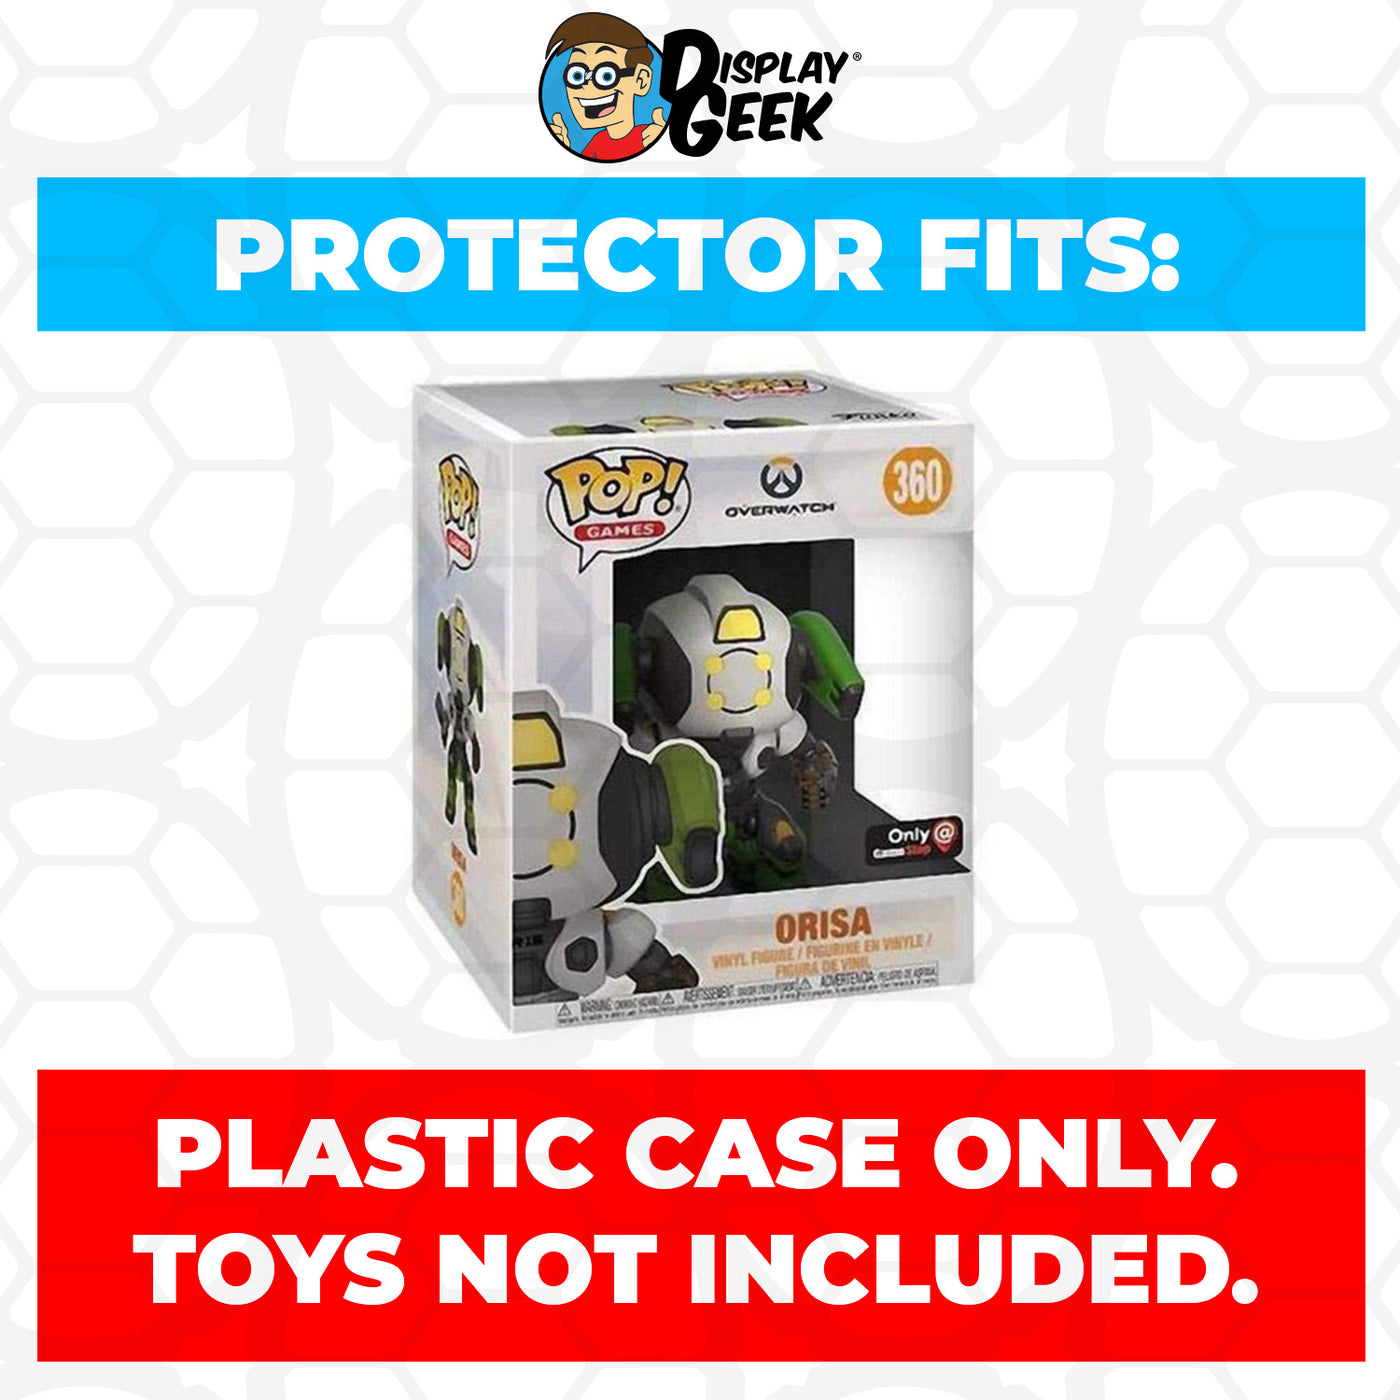 Pop Protector for 6 inch Orisa OR-15 #360 Super Funko Pop on The Protector Guide App by Display Geek